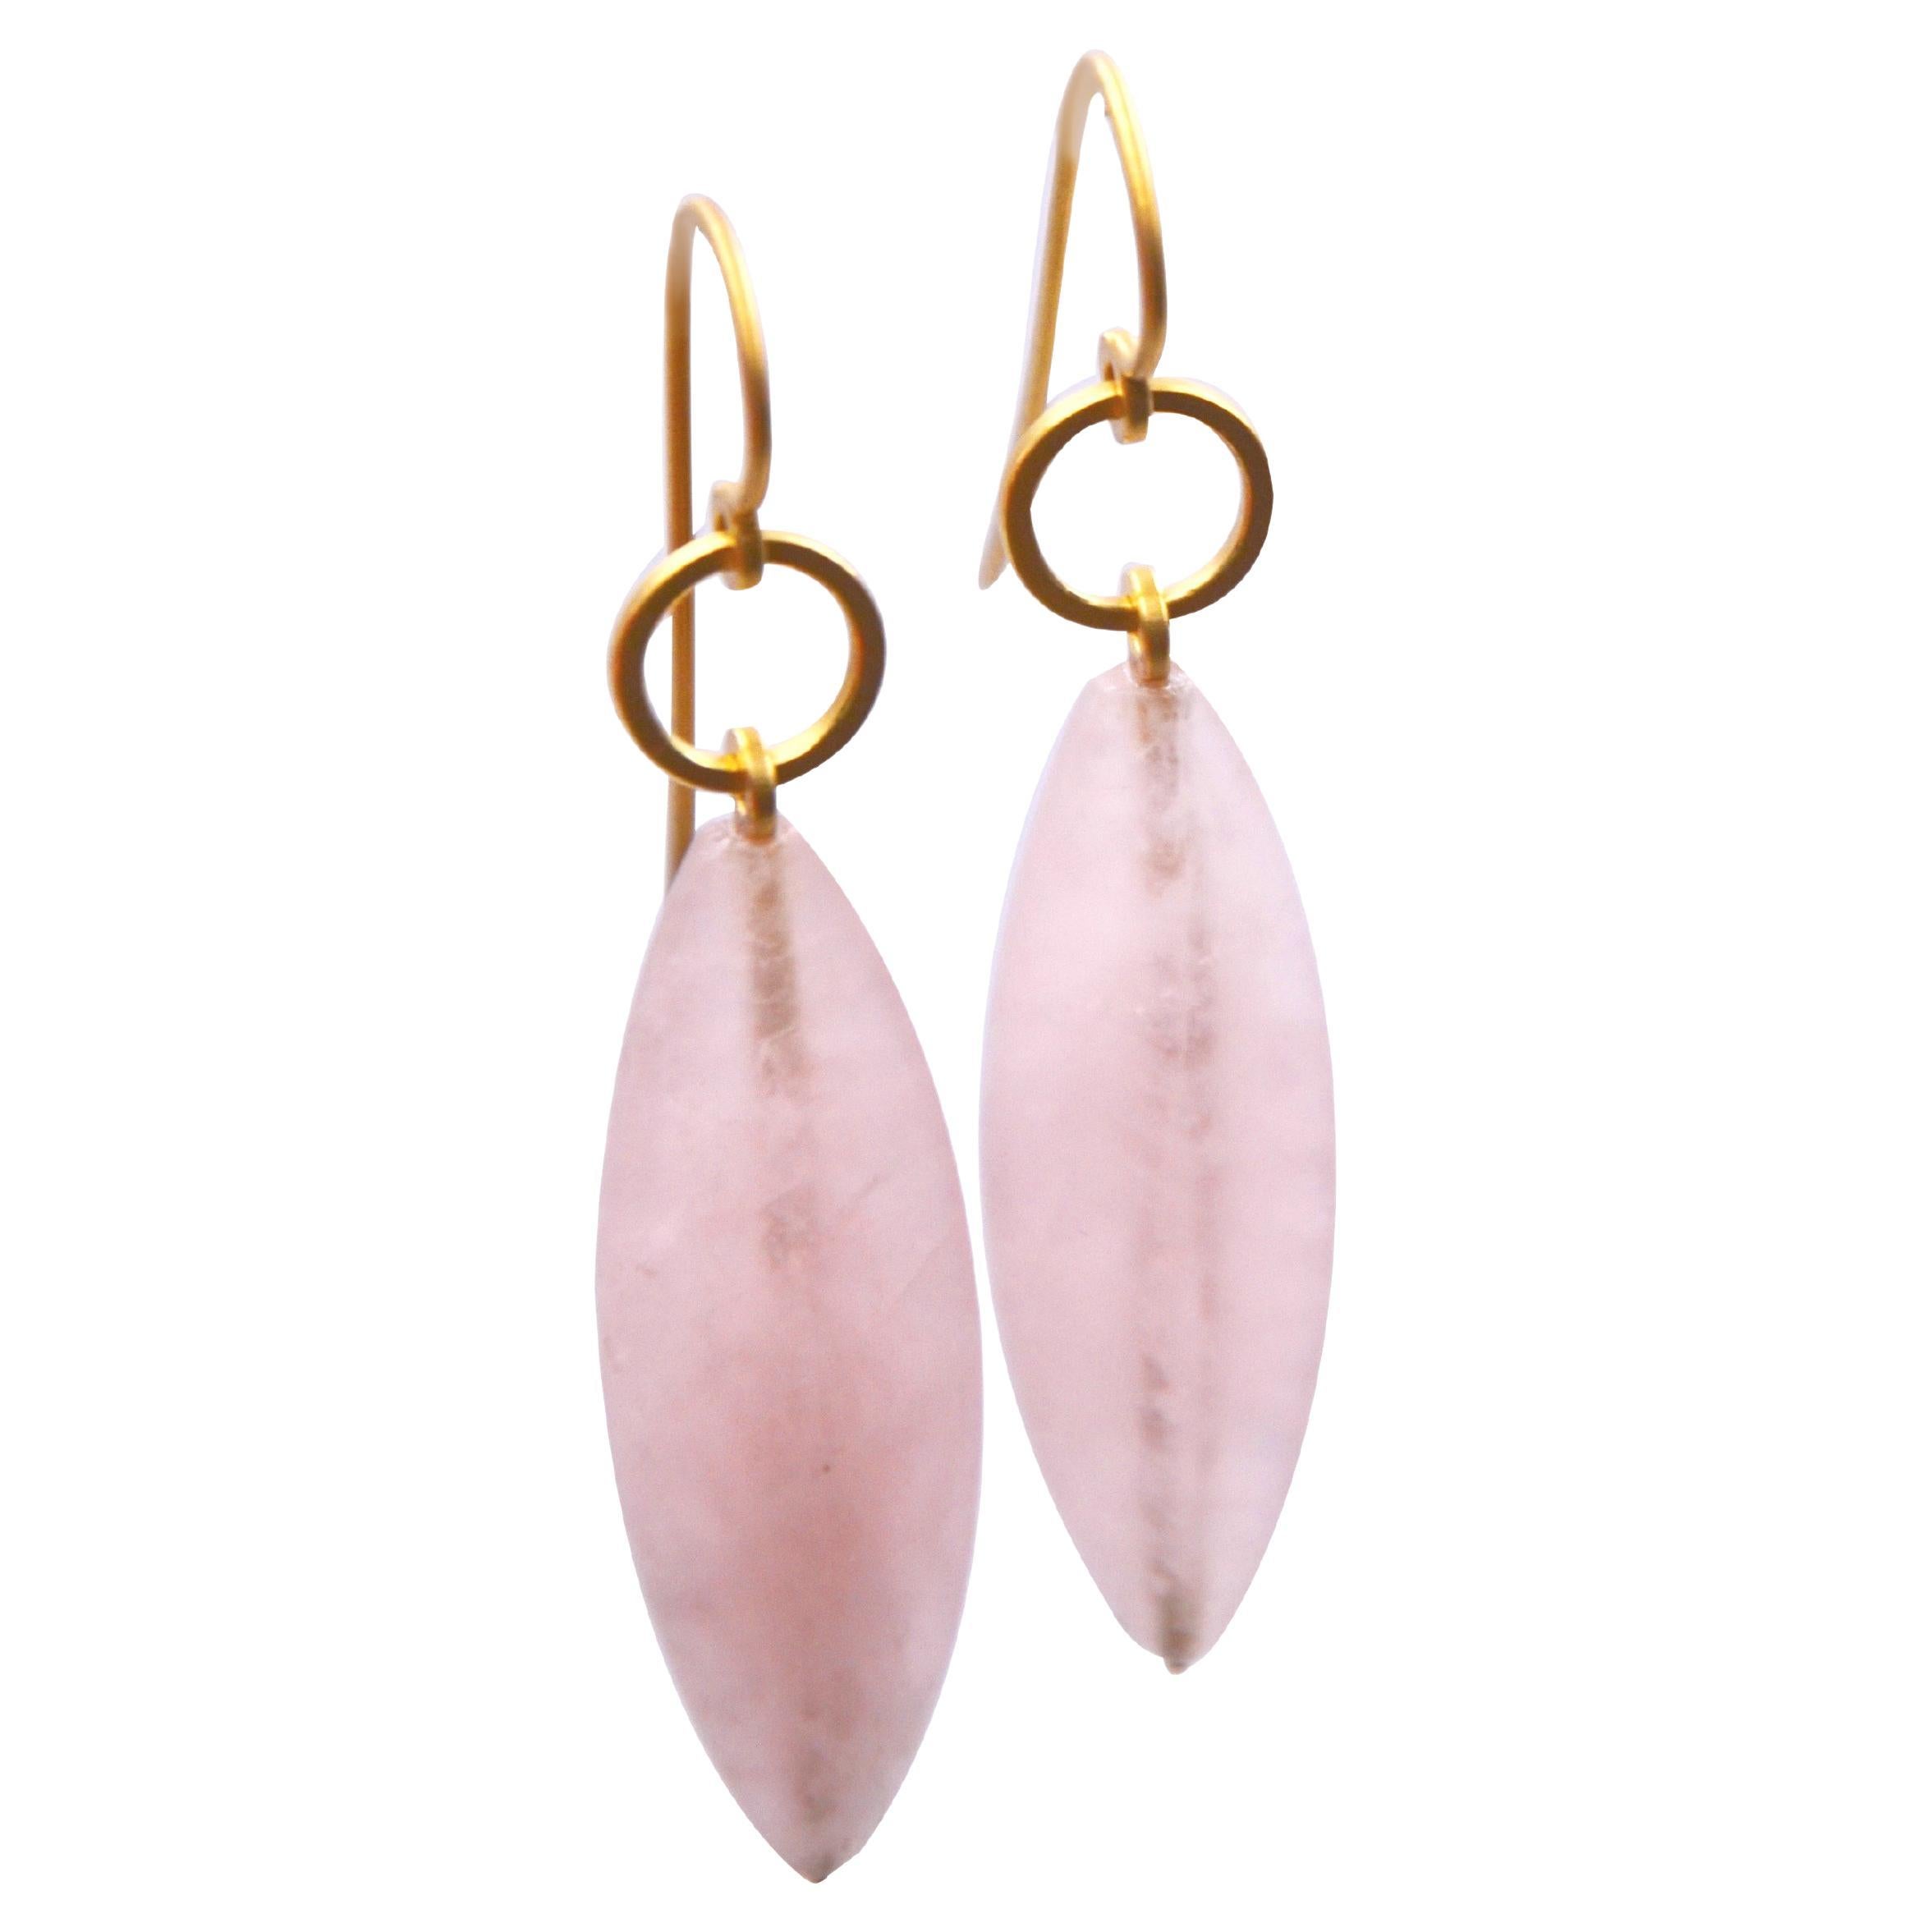 Contemporary 18 Karat Gold Earrings with Rose Quartz For Sale